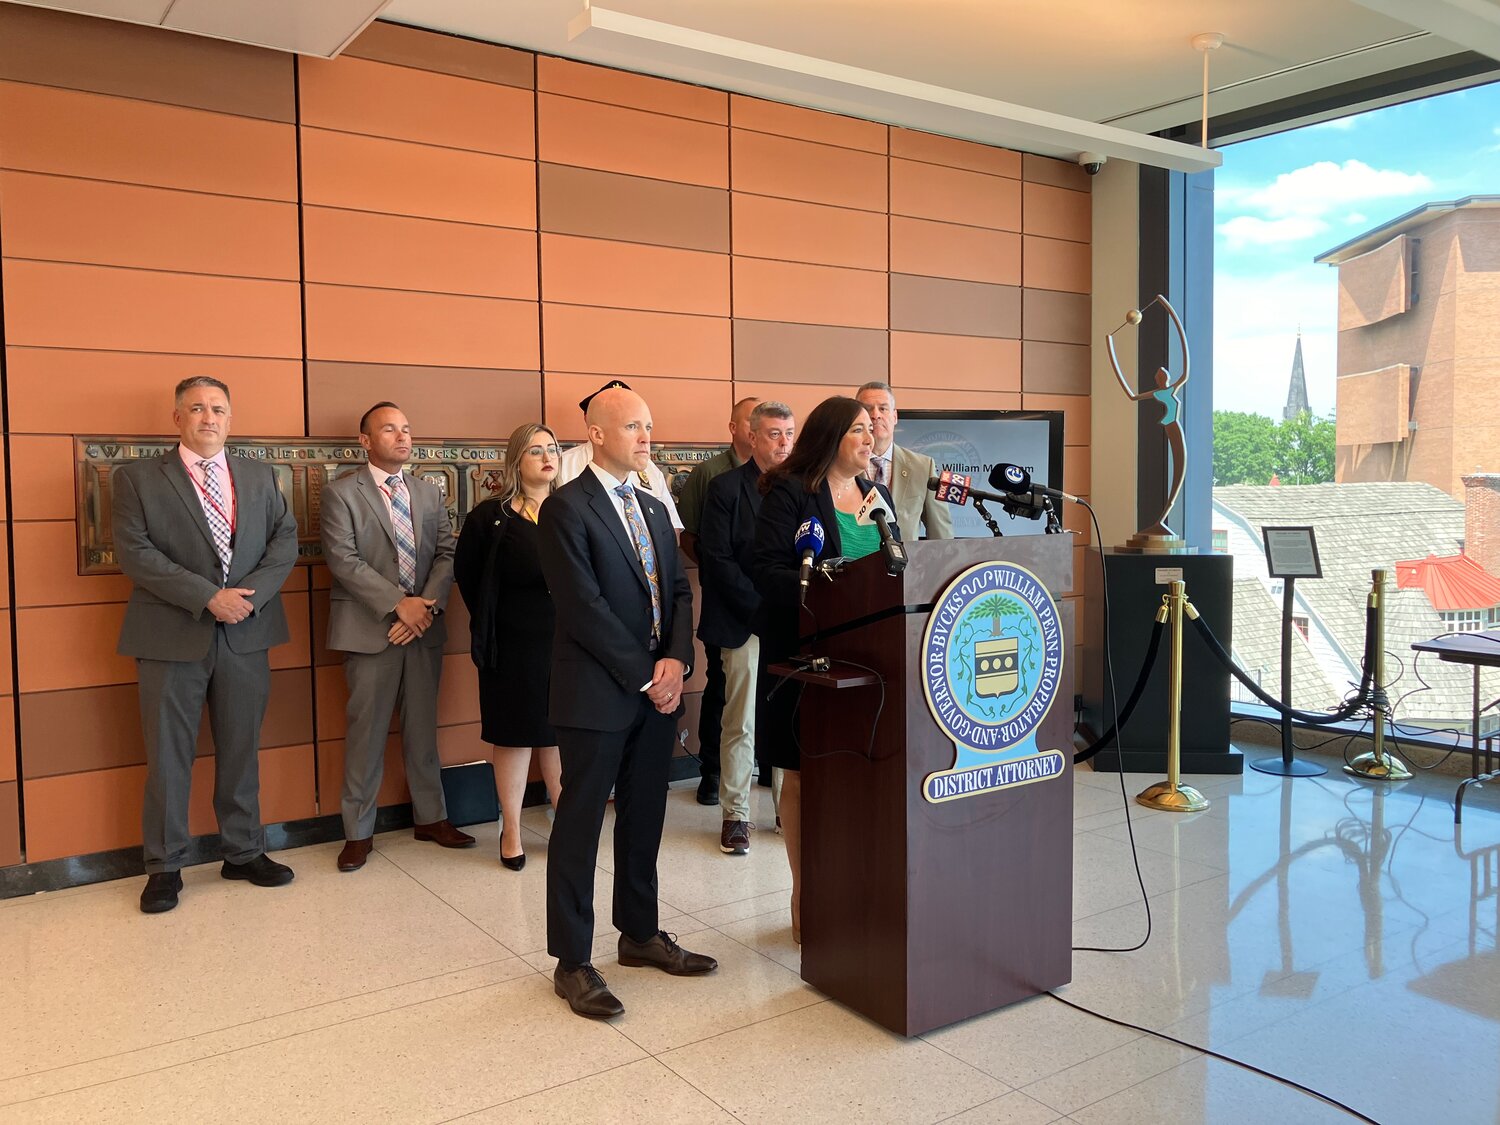 Bucks County District Attorney Jennifer Schorn discusses the investigation into the murder of Dolores Ingram in Northampton Township at the Bucks County Justice Center Thursday. With her are representatives of the District Attorney’s Office and the Northampton Township Police Department.